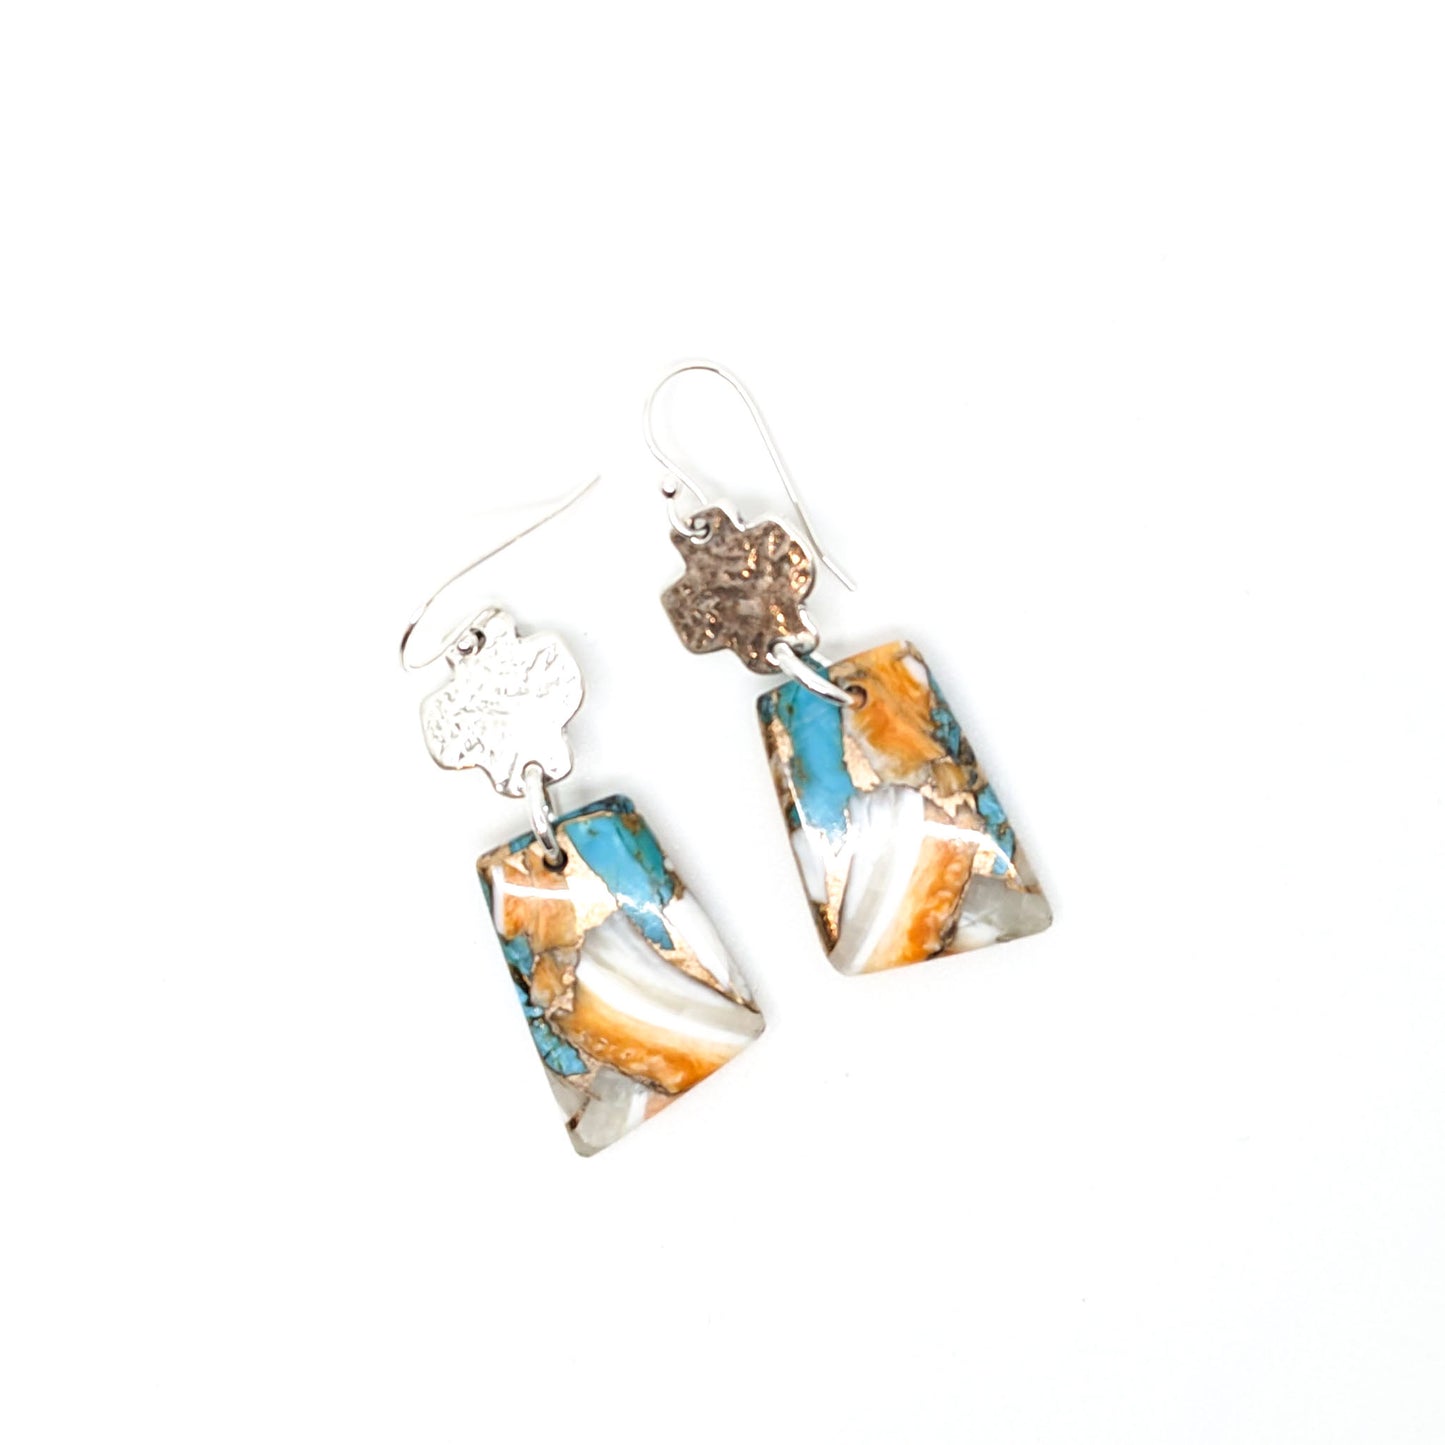 Small Earrings with Large Stone Slab-RKE-16